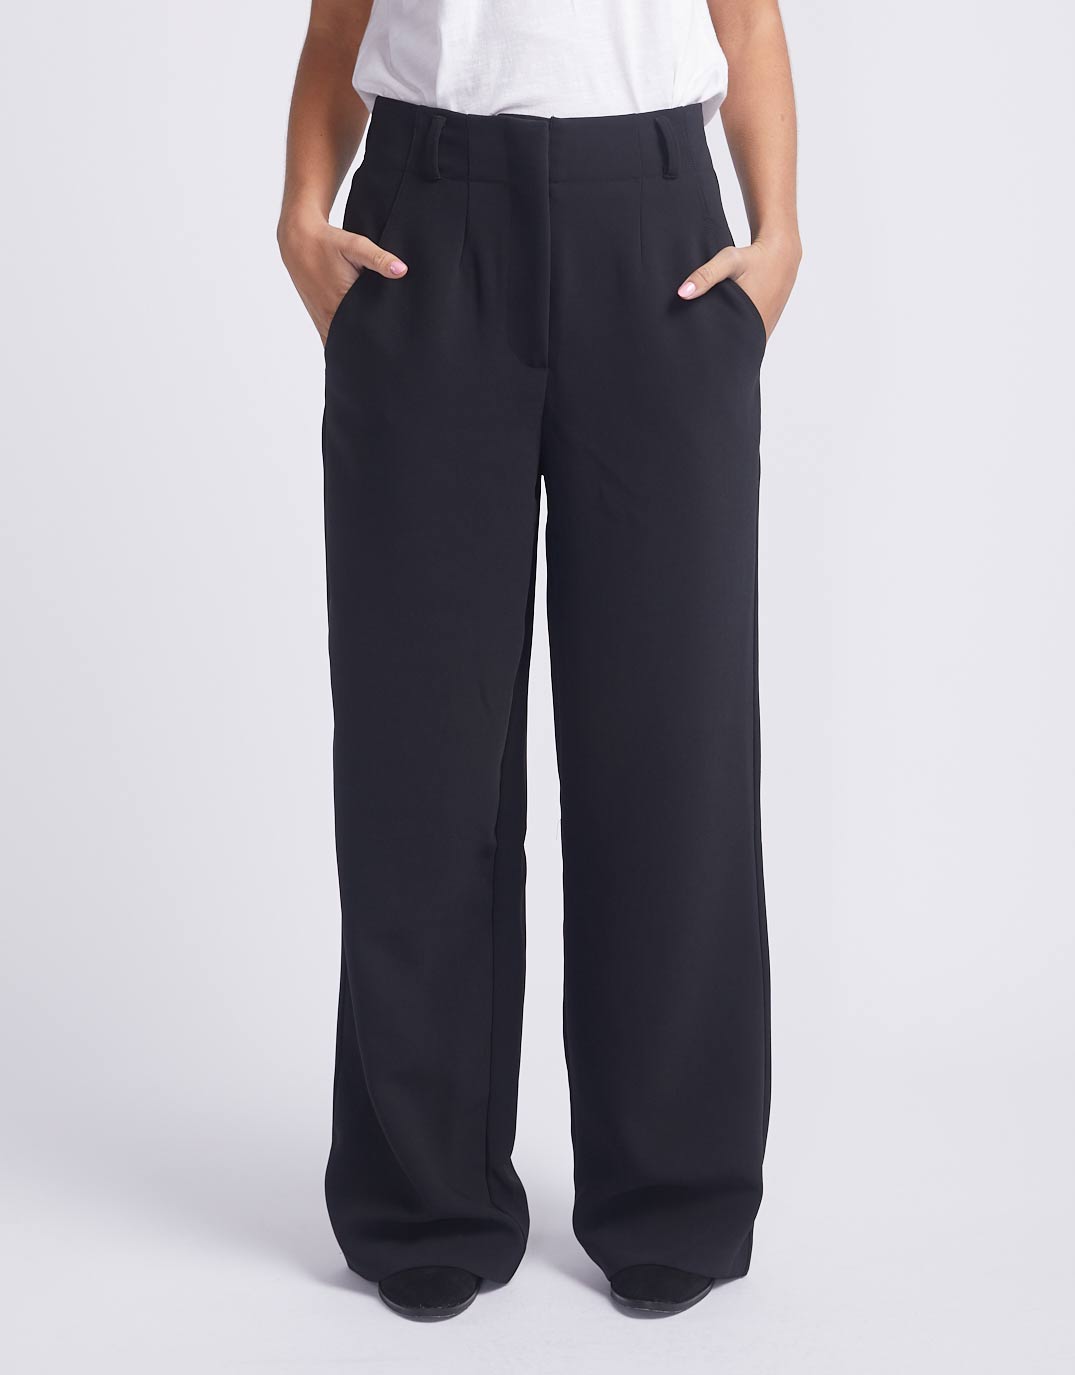 fate-becker-brightside-tailored-pant-black-womens-clothing